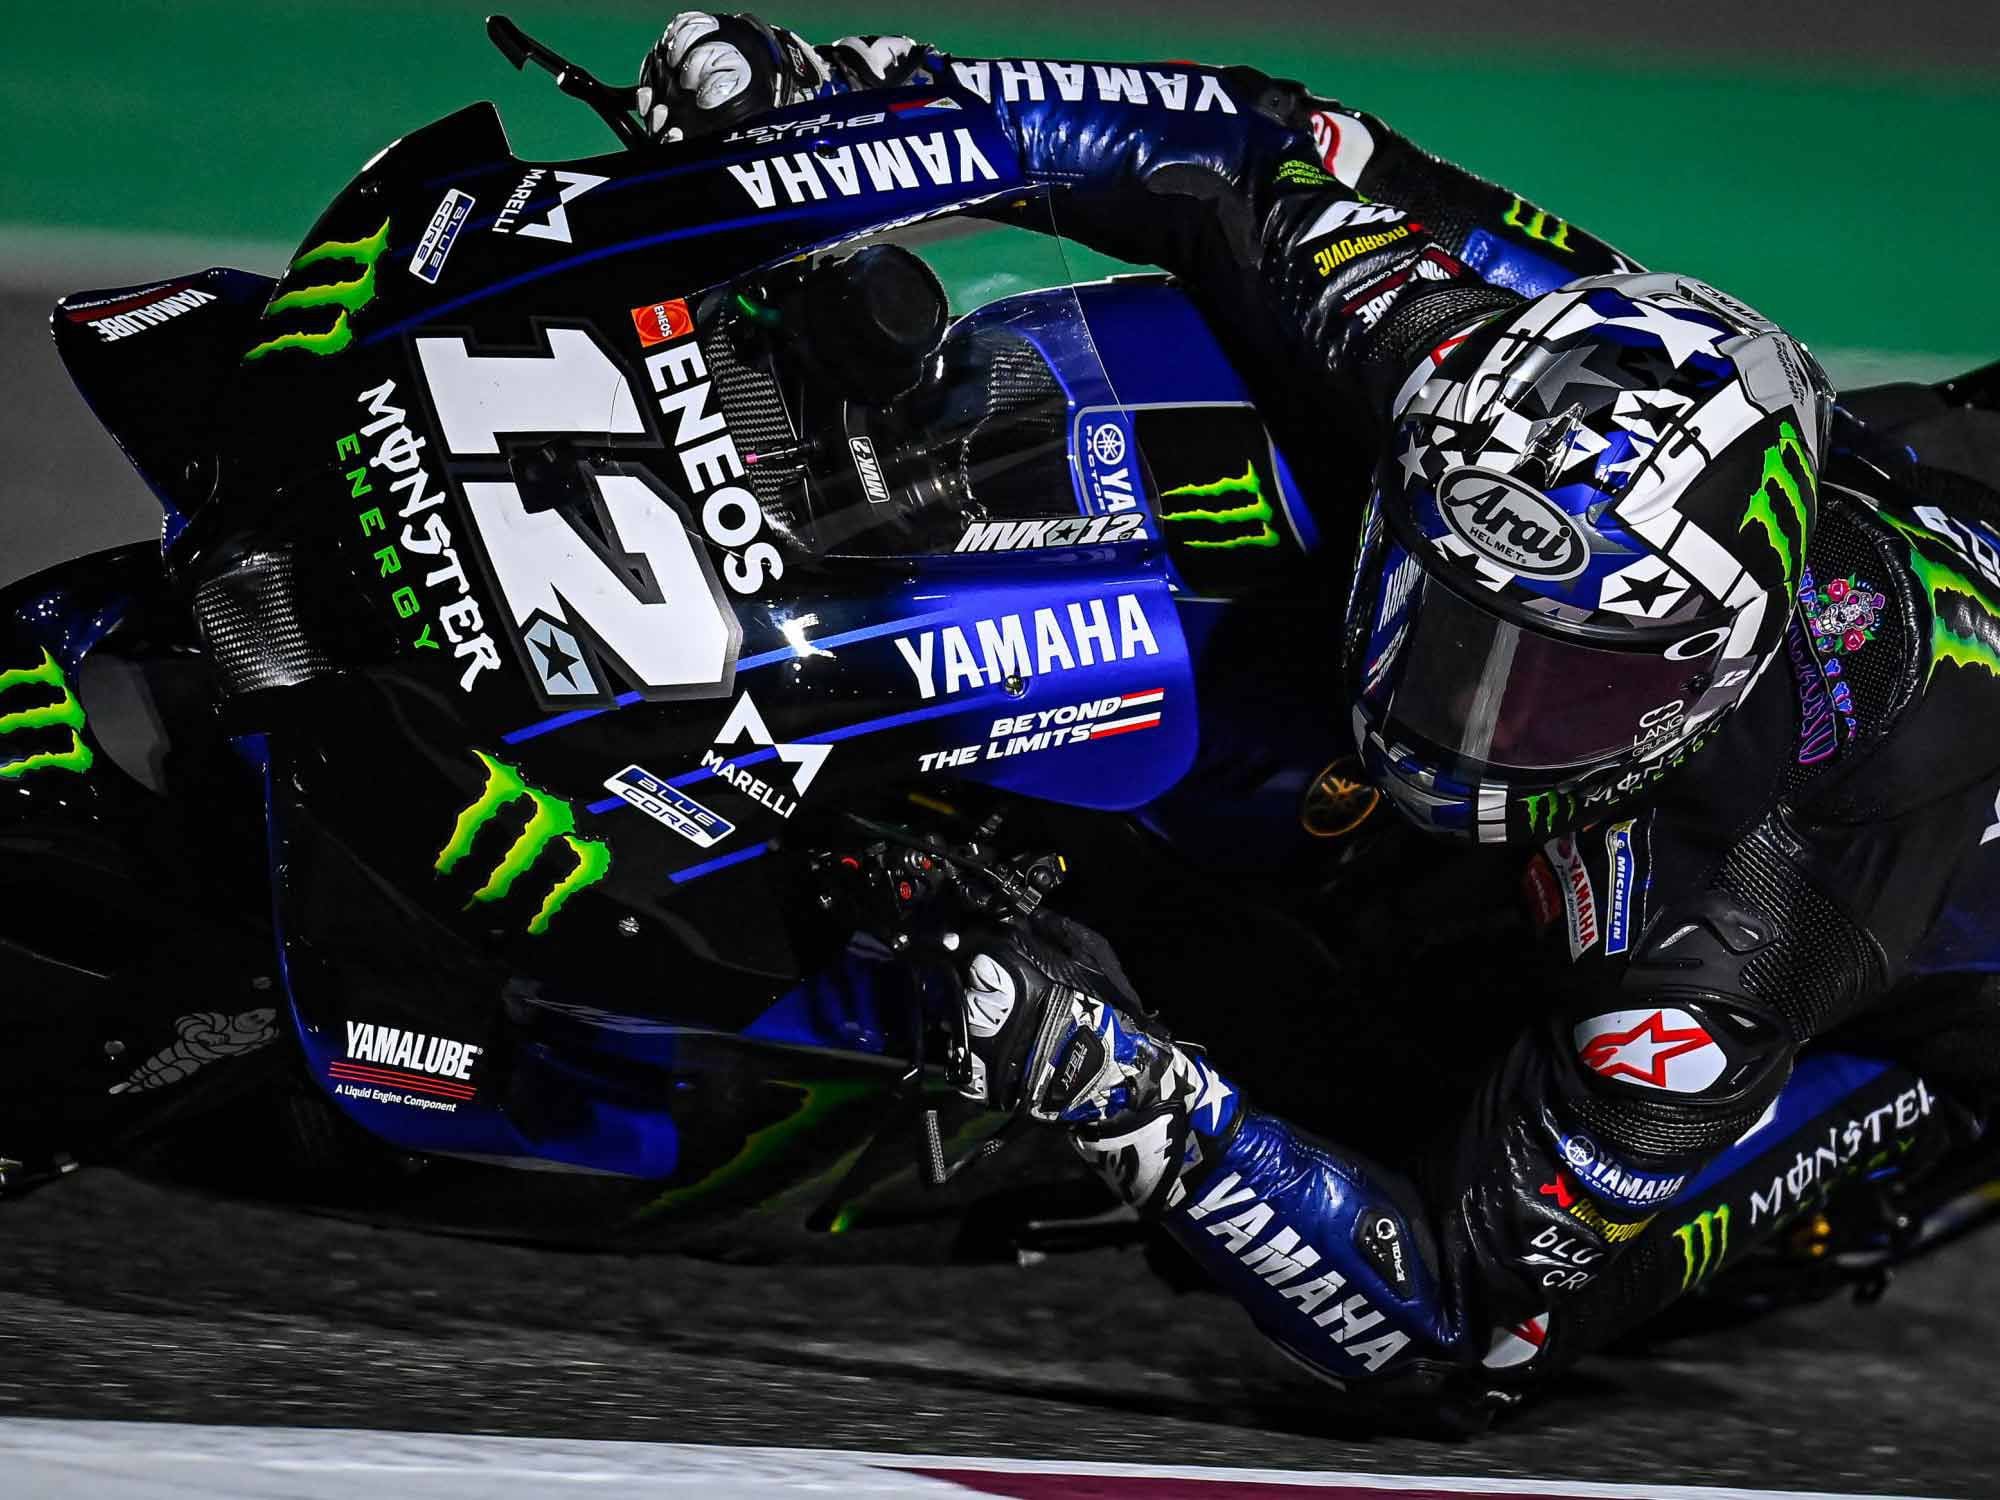 How will the front tires of the Yamahas perform when in a race situation?